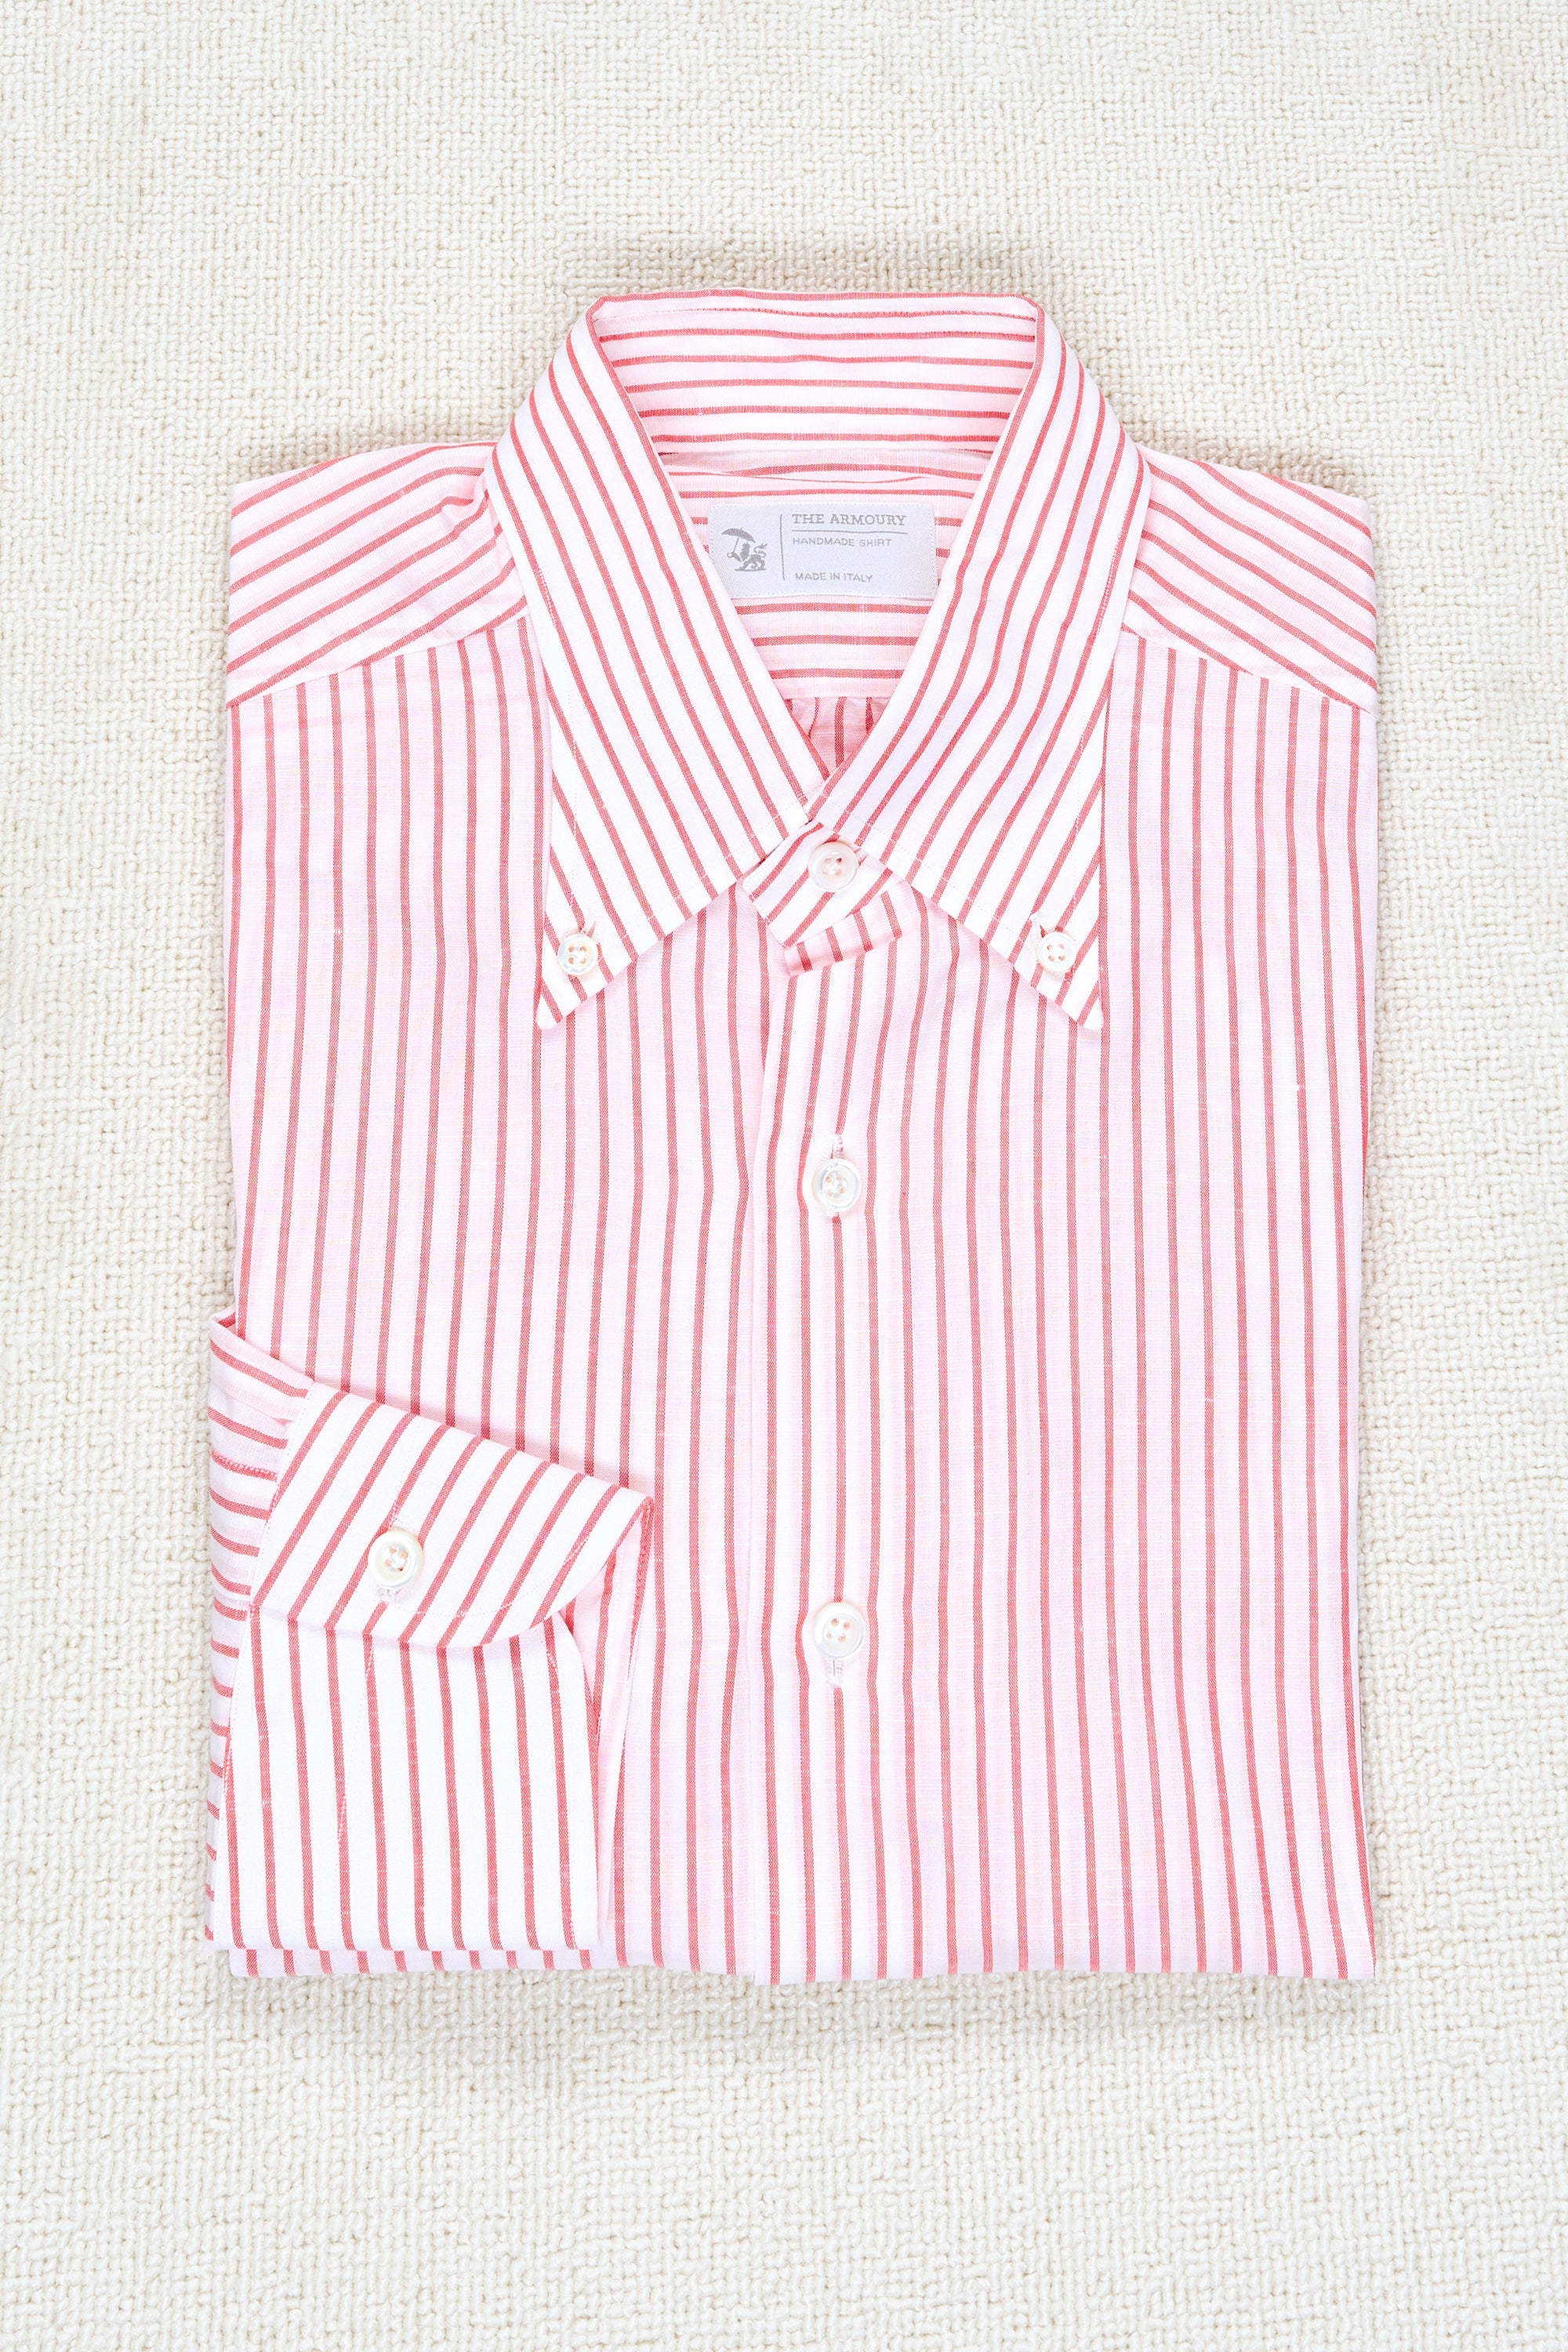 The Armoury White with Red Stripe Cotton Button-down Shirt MTM *sample*